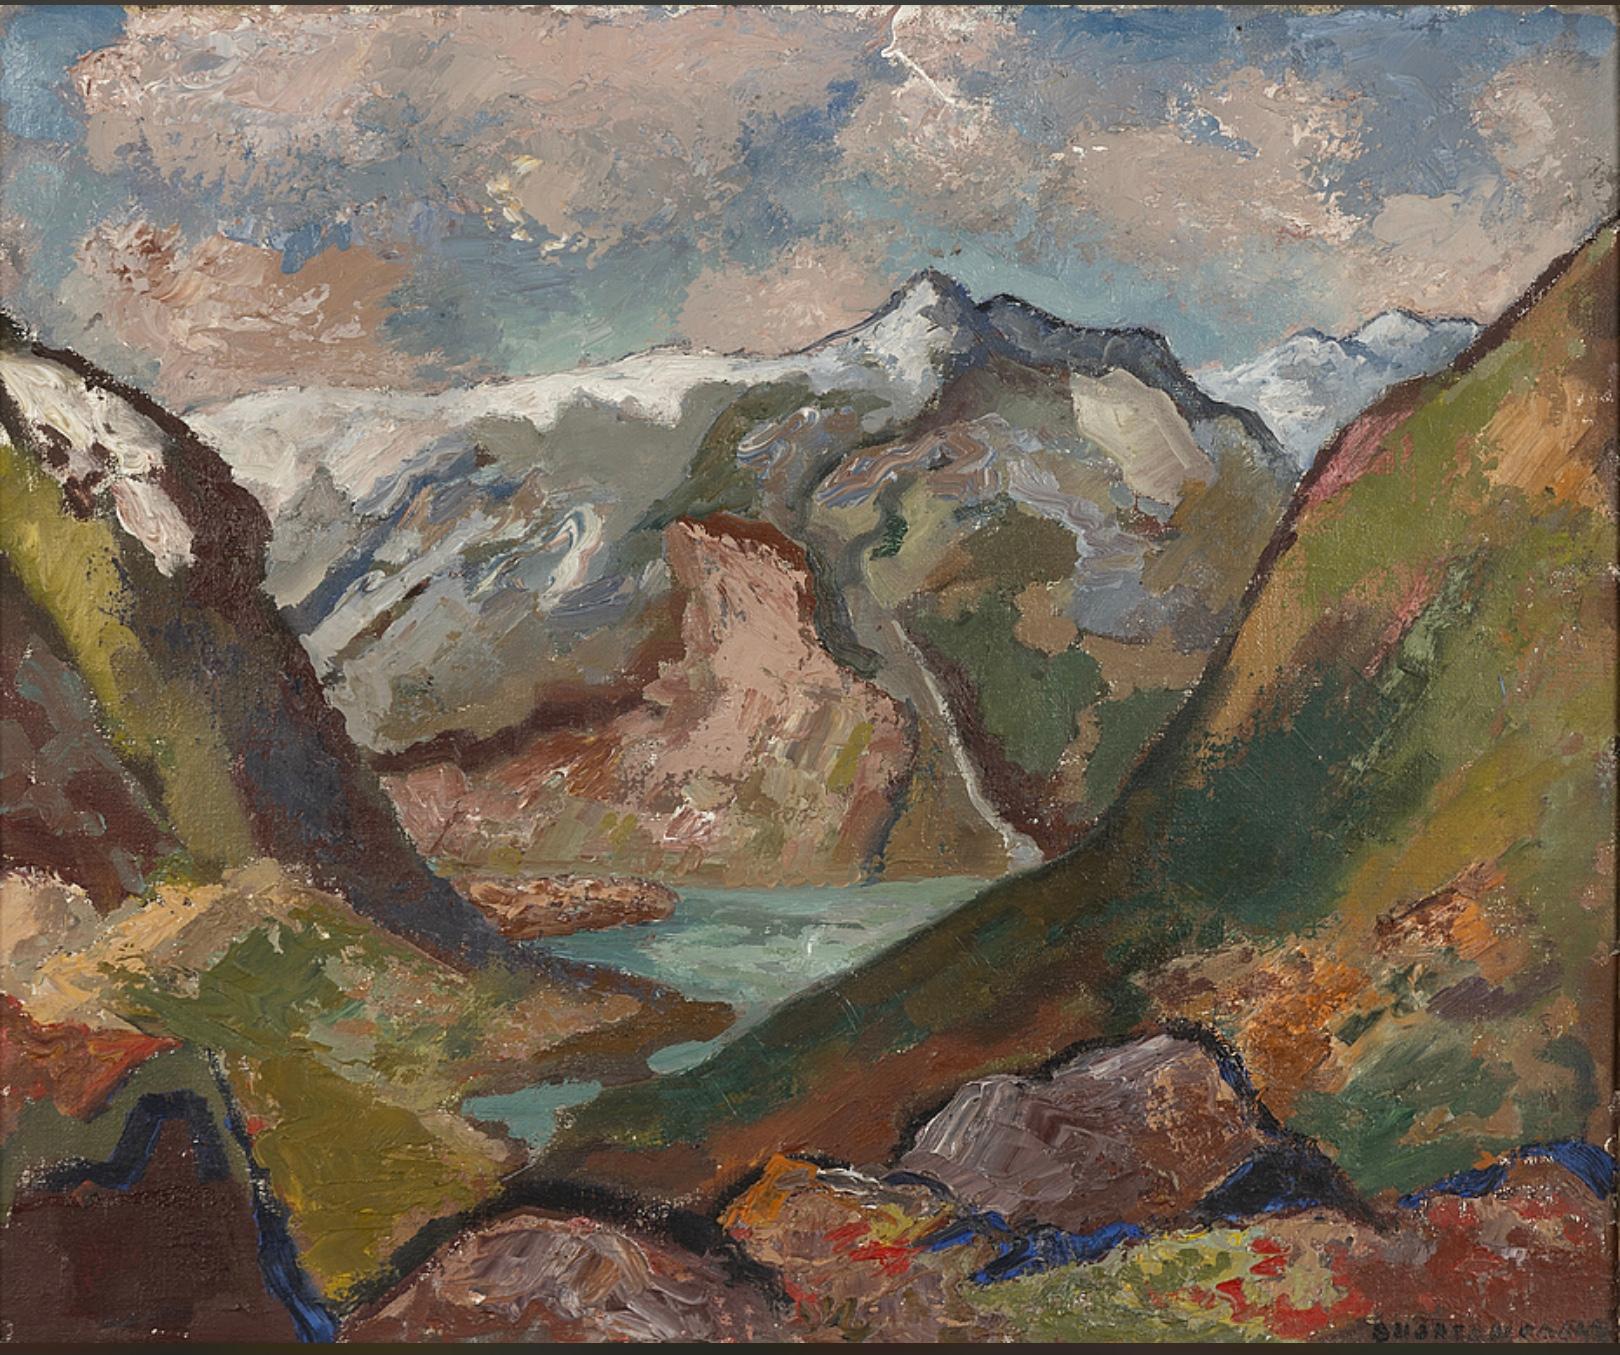 This striking mid 20th century sympathetically framed oil on canvas of Norwegian hills and mountain landscape.
By Swedish artist Brita Nordencreutz who was along with her figurative studies was known for her colourful landscapes, and studied in